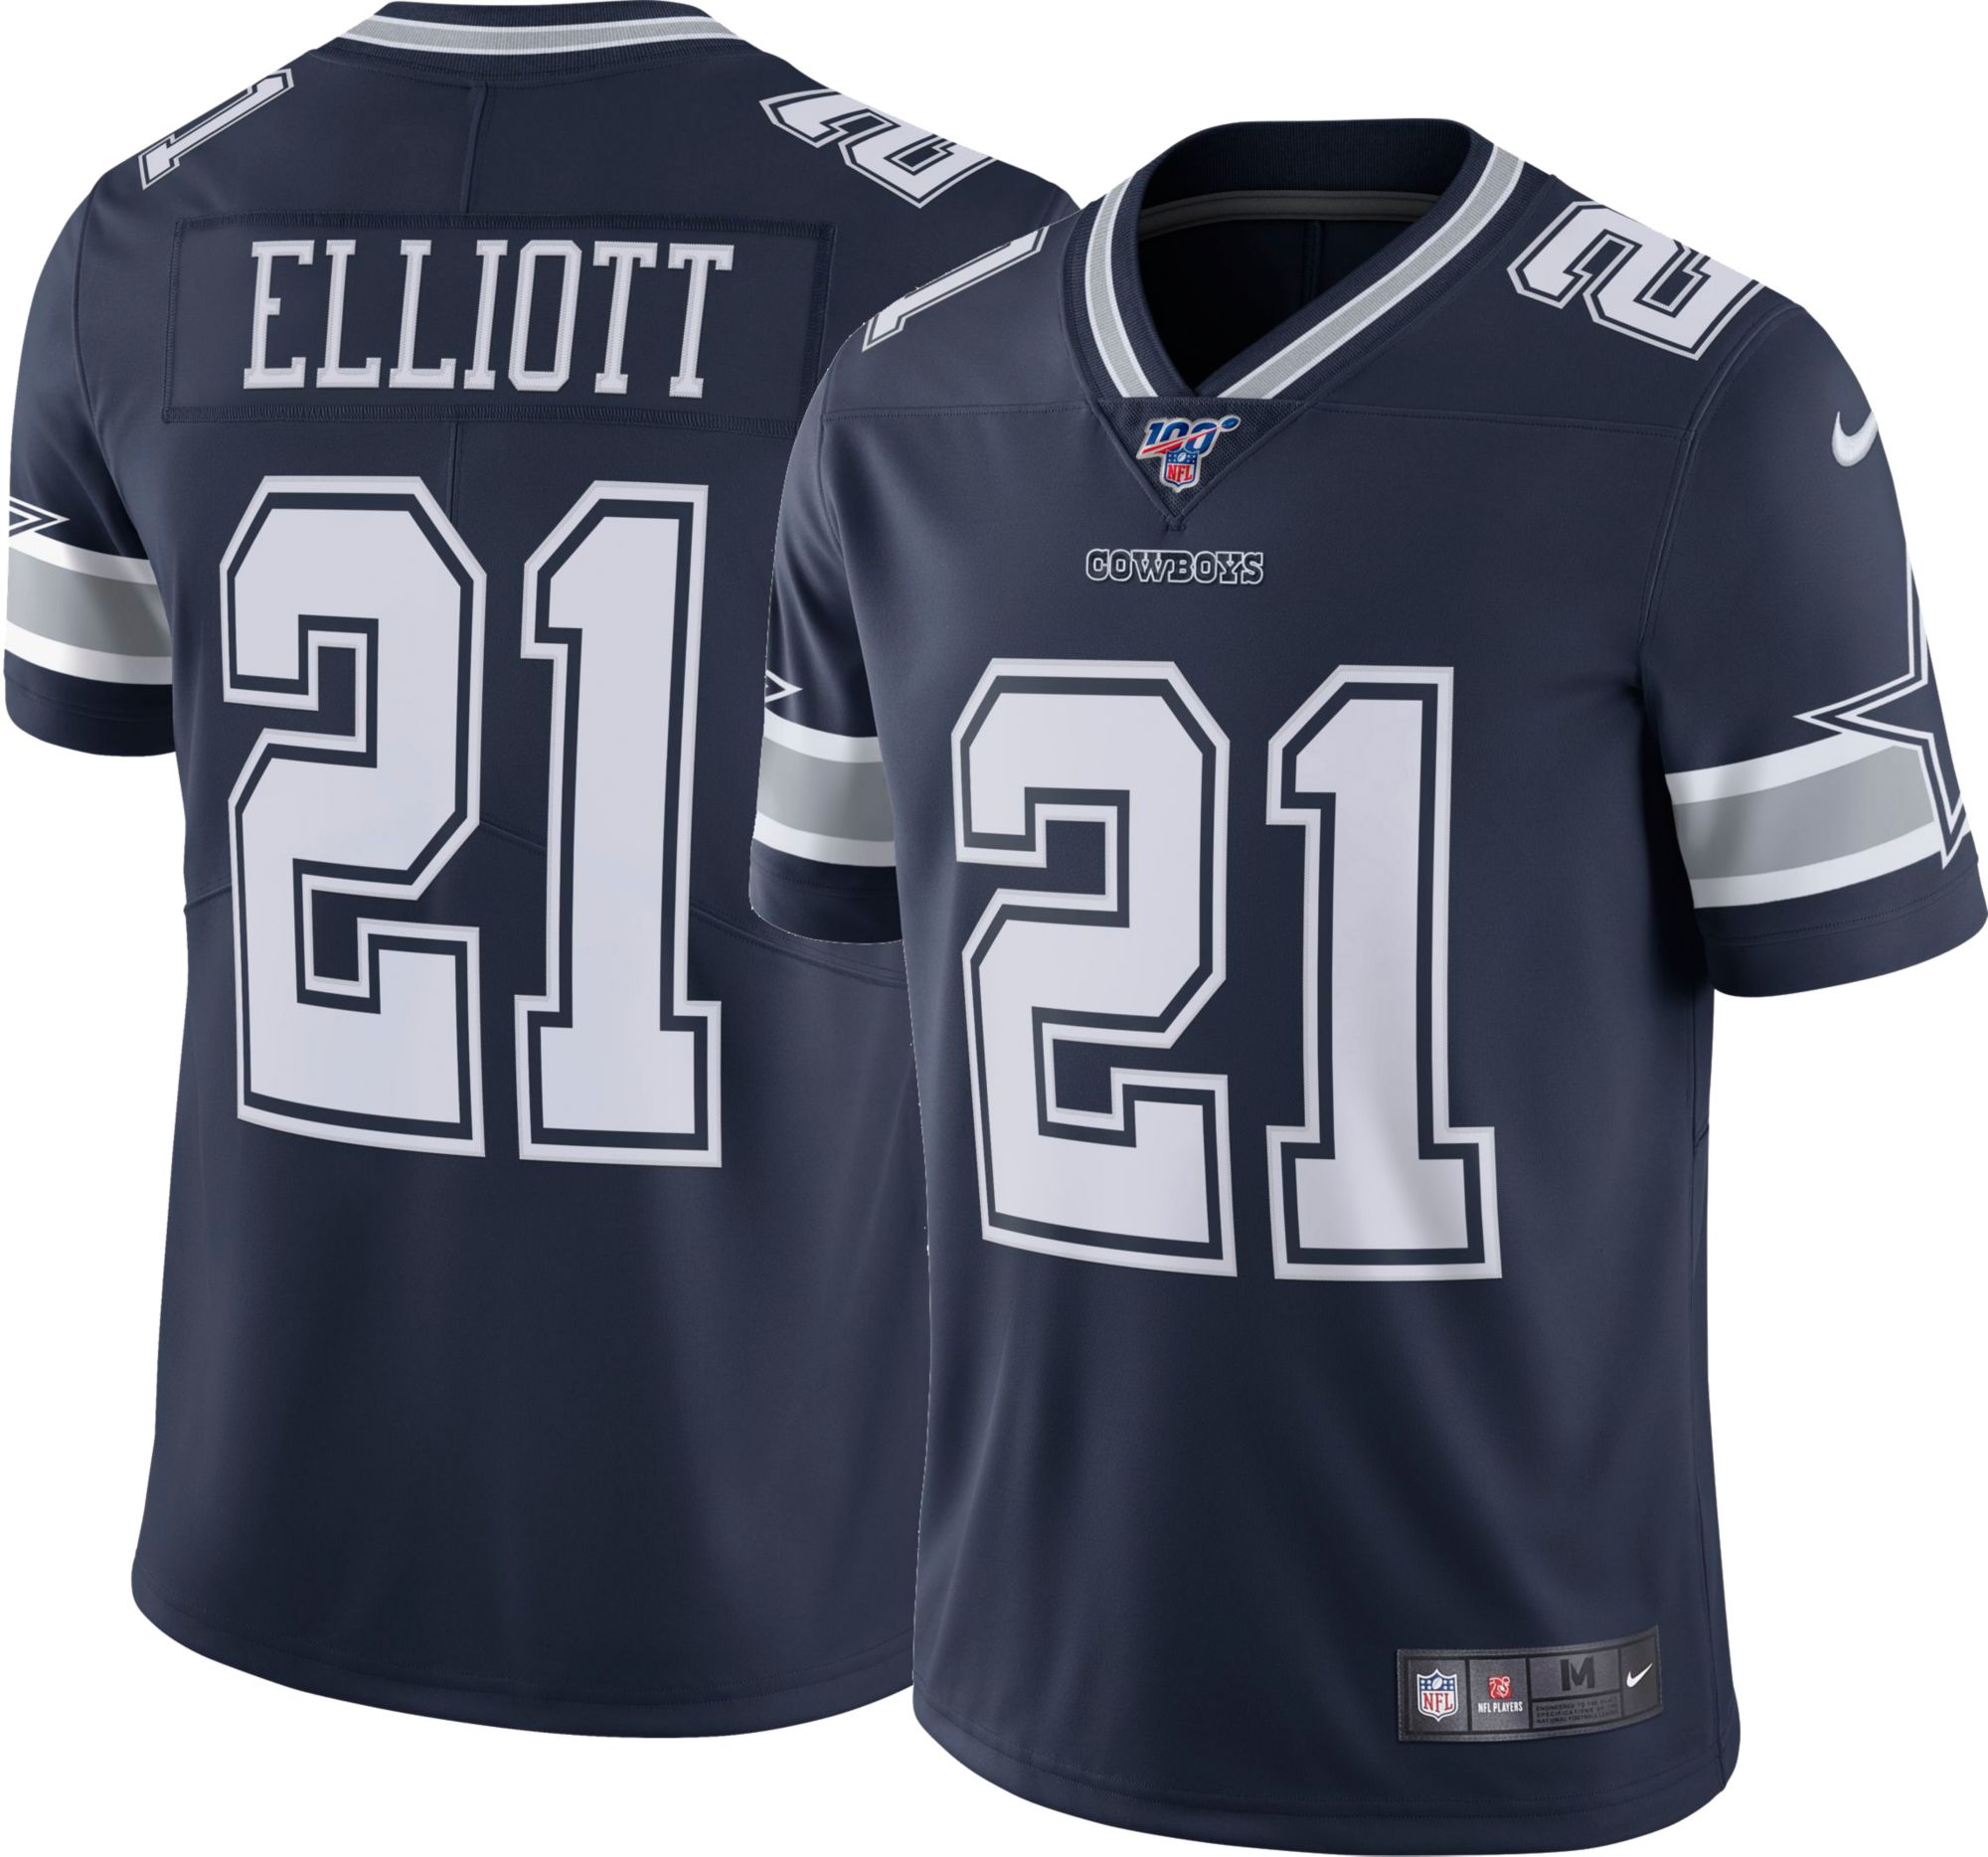 best cowboys jersey to get